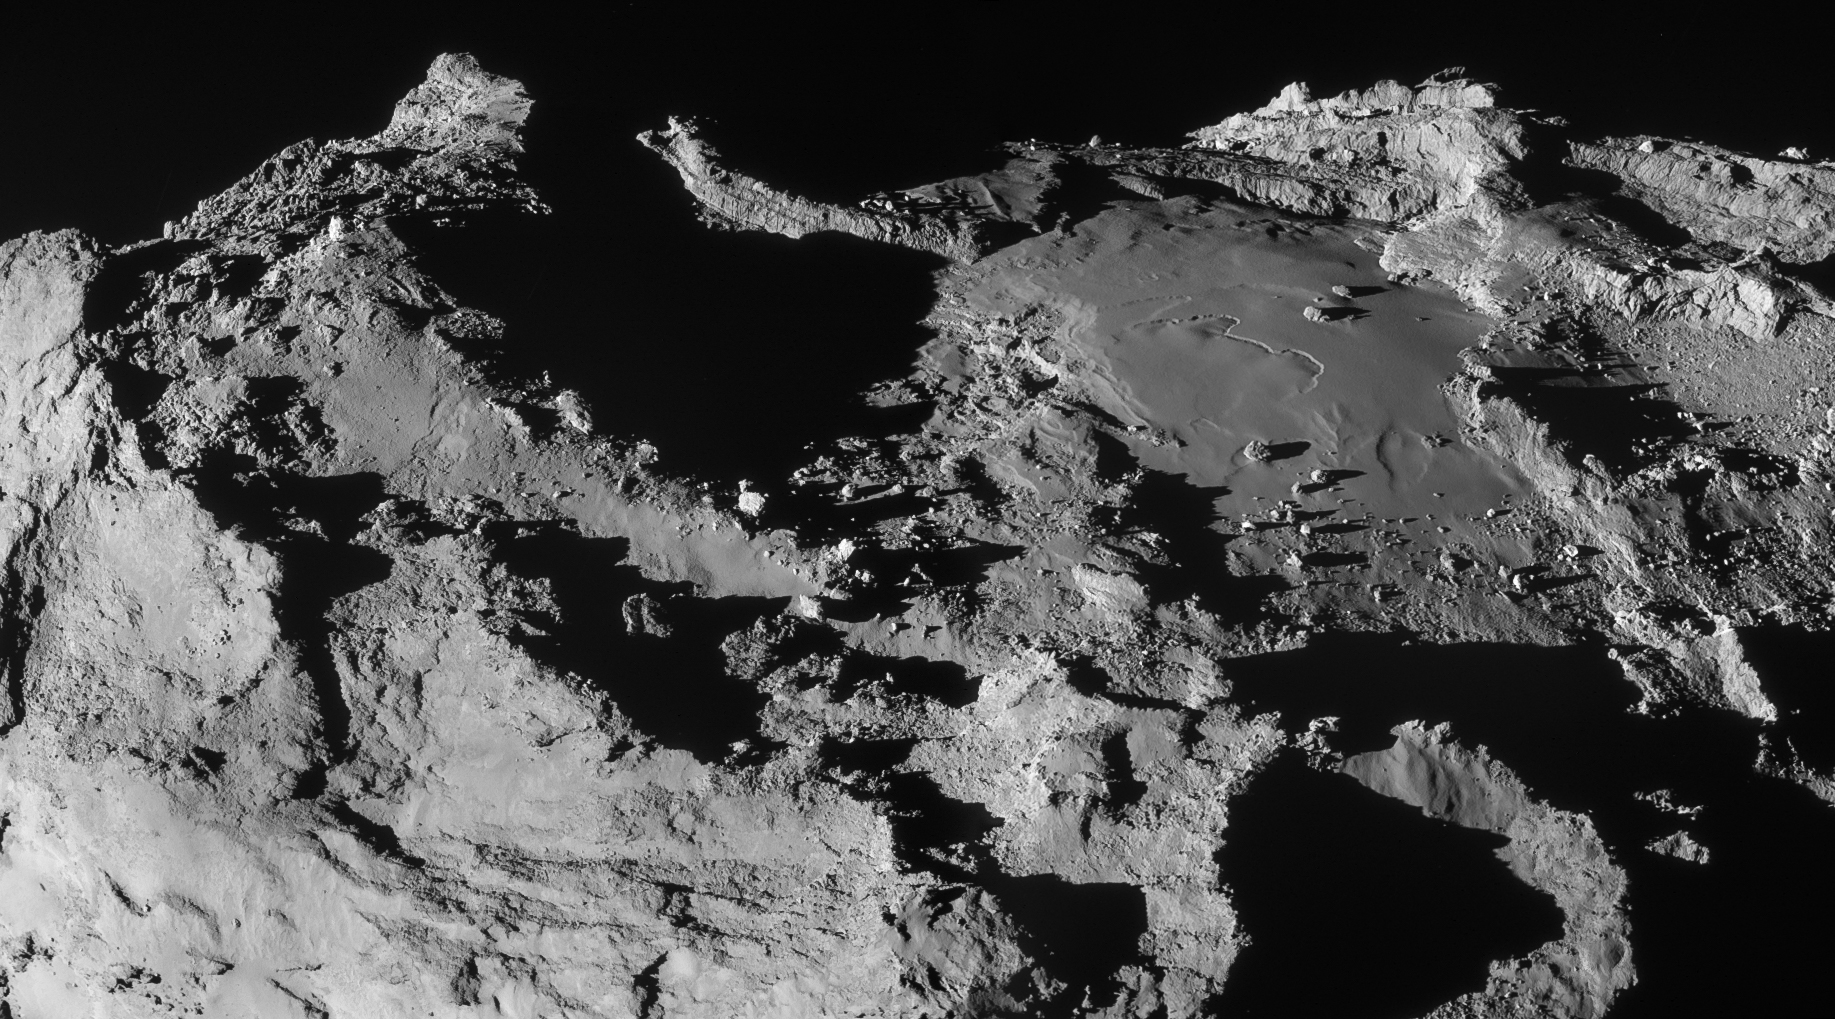 This stunning scene was created from two NAVCAM frames acquired at 19.9 km from the comet centre on 28 March. The scale is about 1.7 m/pixel and the image measures 3.1 x 1.7 km. The image has been adjusted for intensity and contrast, and the vignetting has been fixed. Credits: ESA/Rosetta/NAVCAM – CC BY-SA IGO 3.0